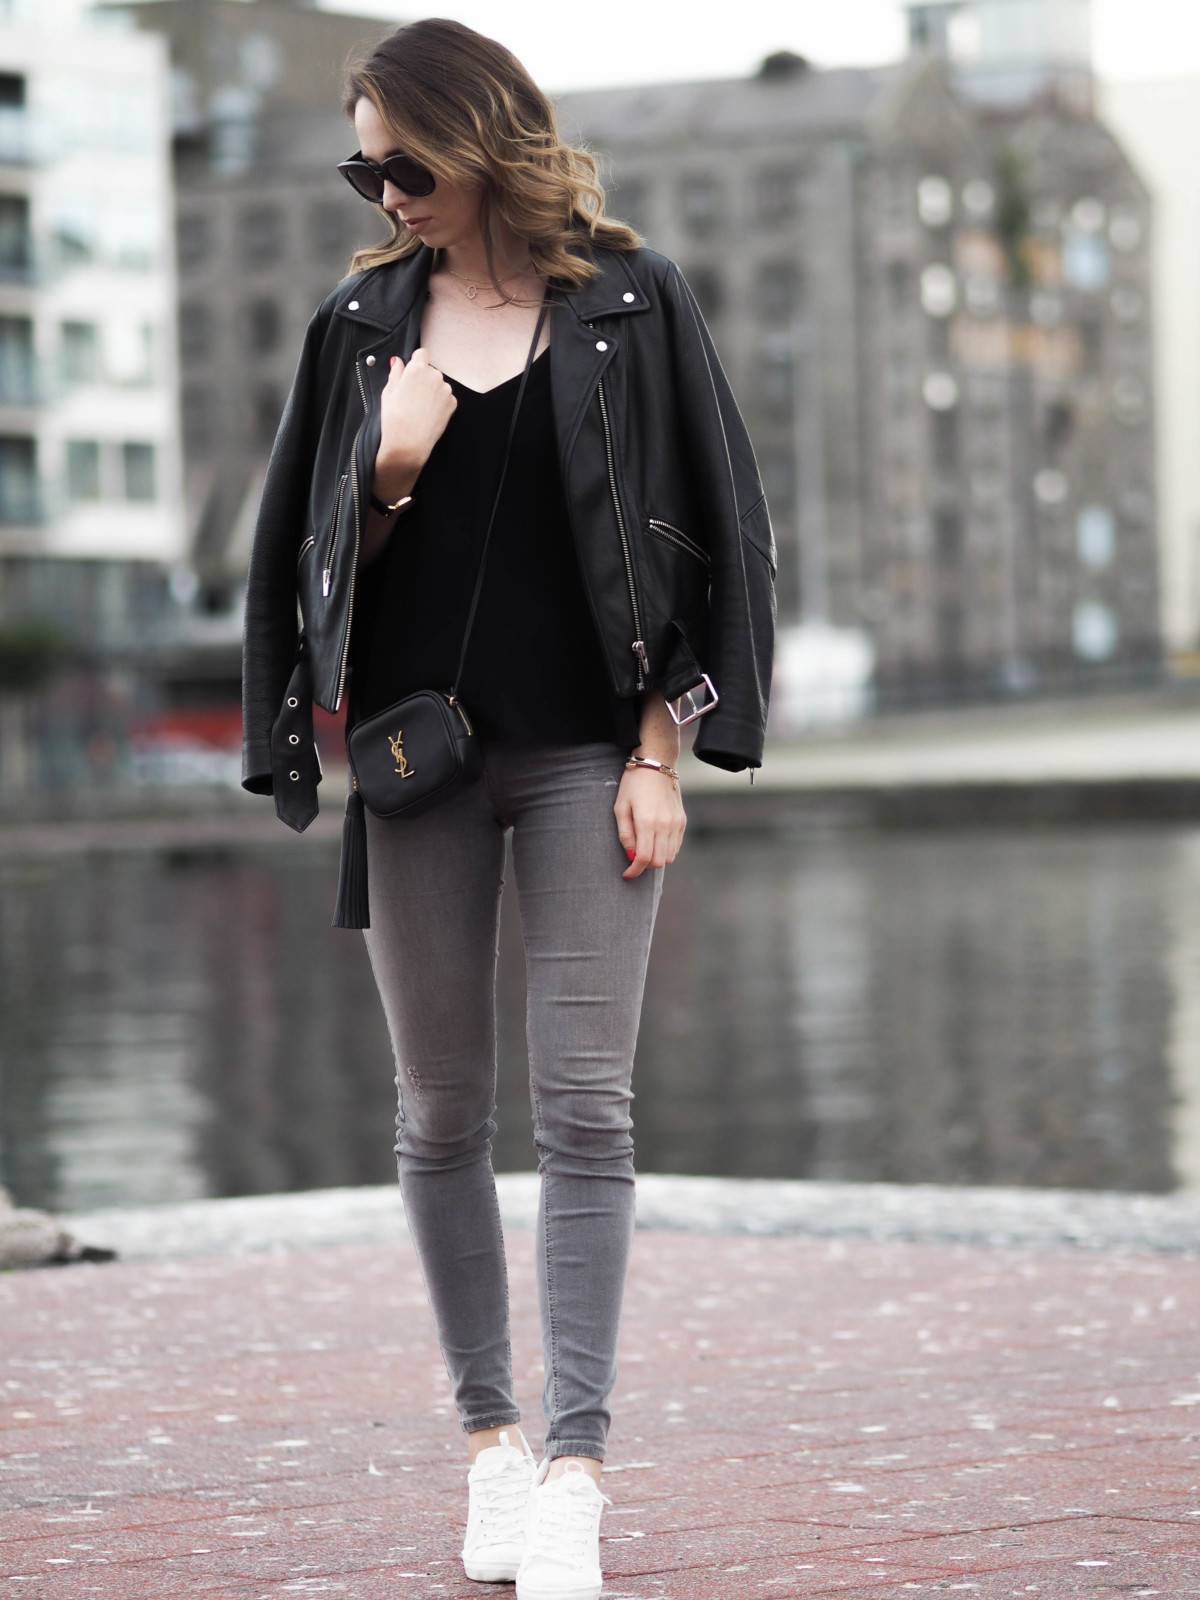 THE YSL Blogger Bag, and how I nabbed it on a major discount